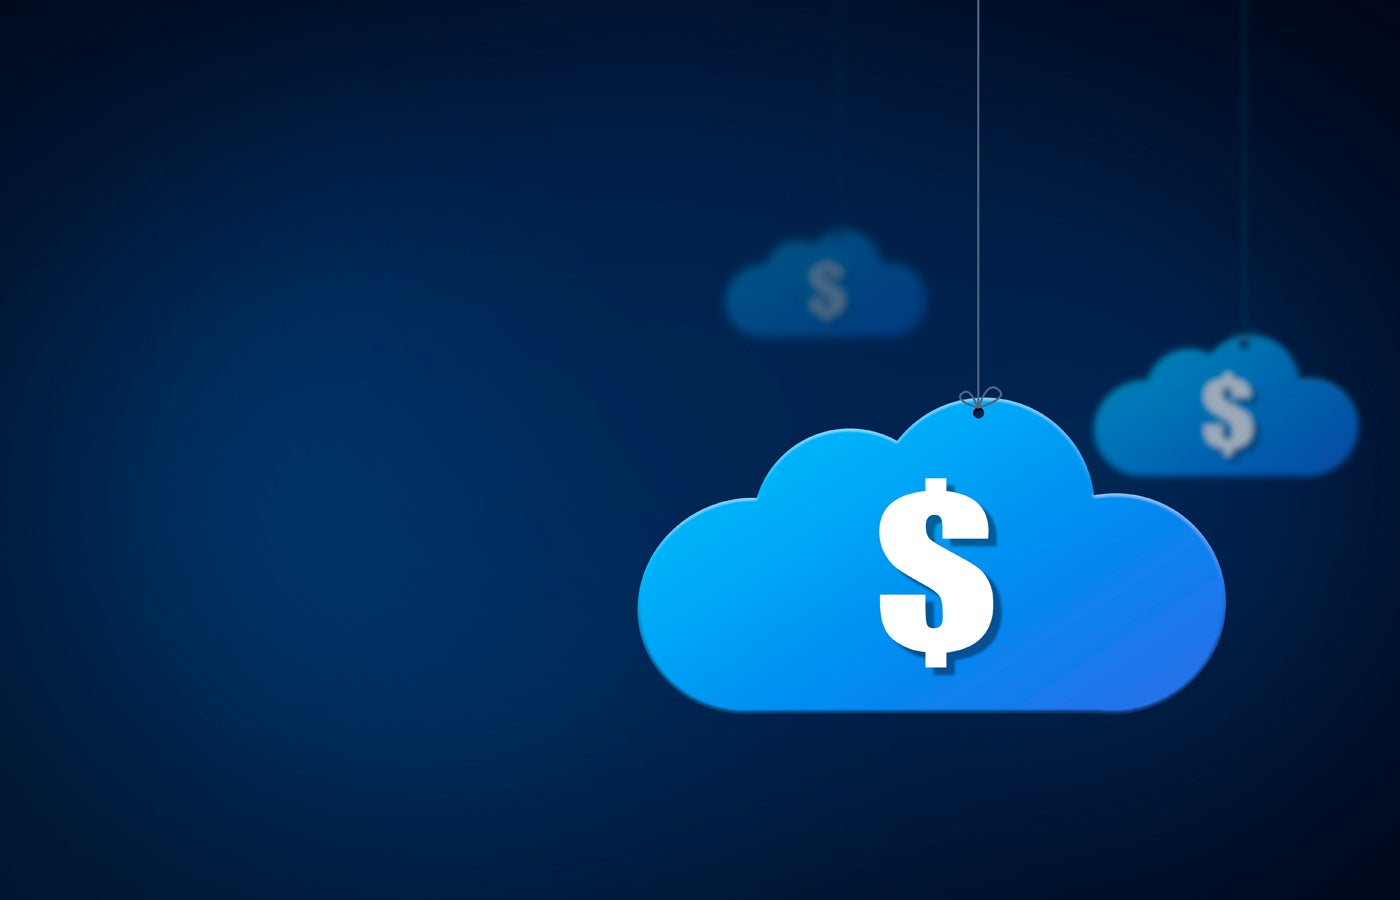 Cloud Cost Optimisation Tools Not Enough To Rein In ‘Uncontrolled’ Cloud Spending